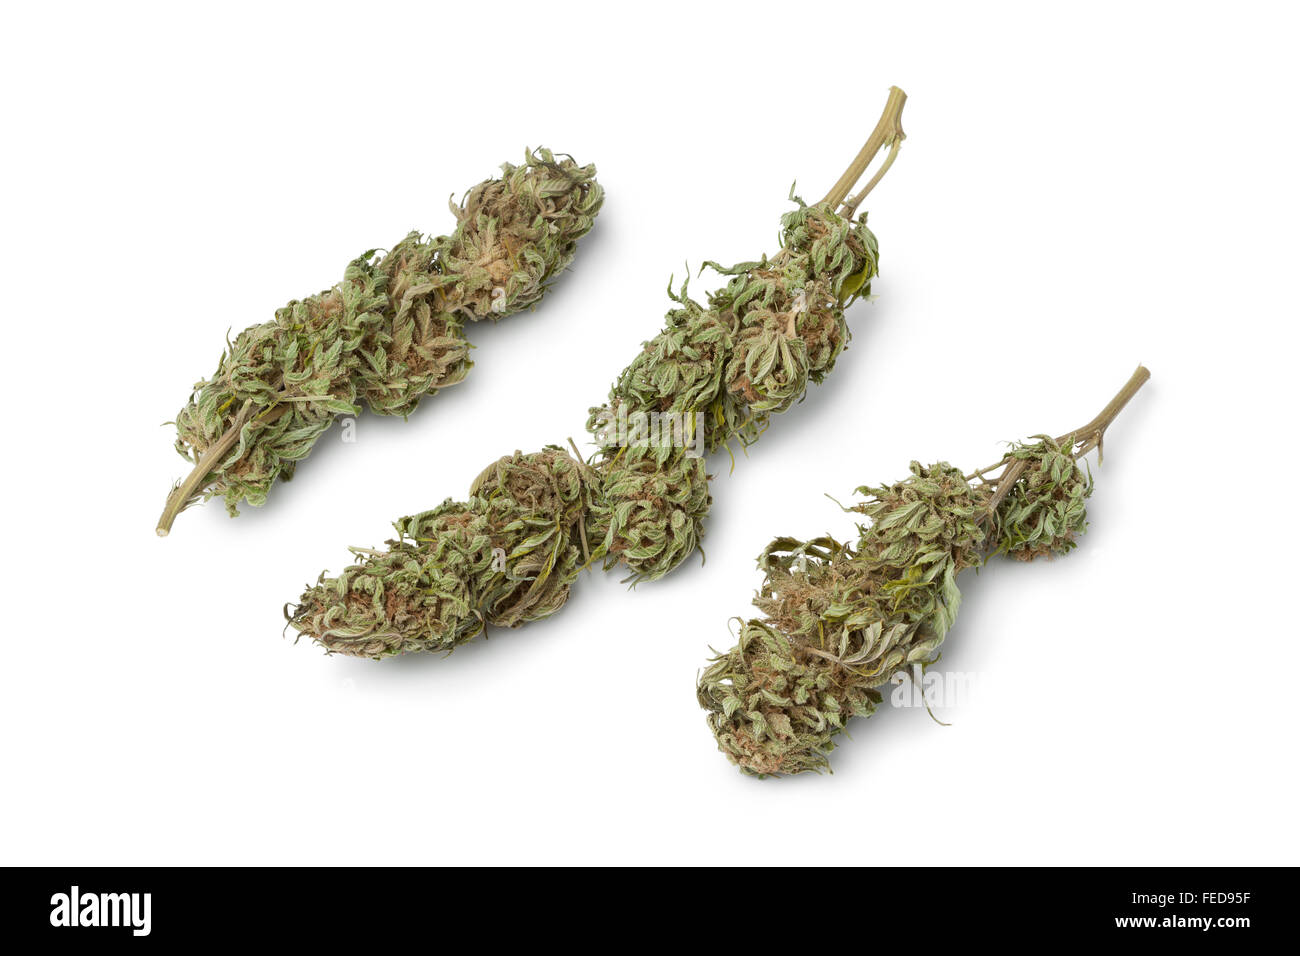 Dried marijuana buds with visible THC on white background Stock Photo